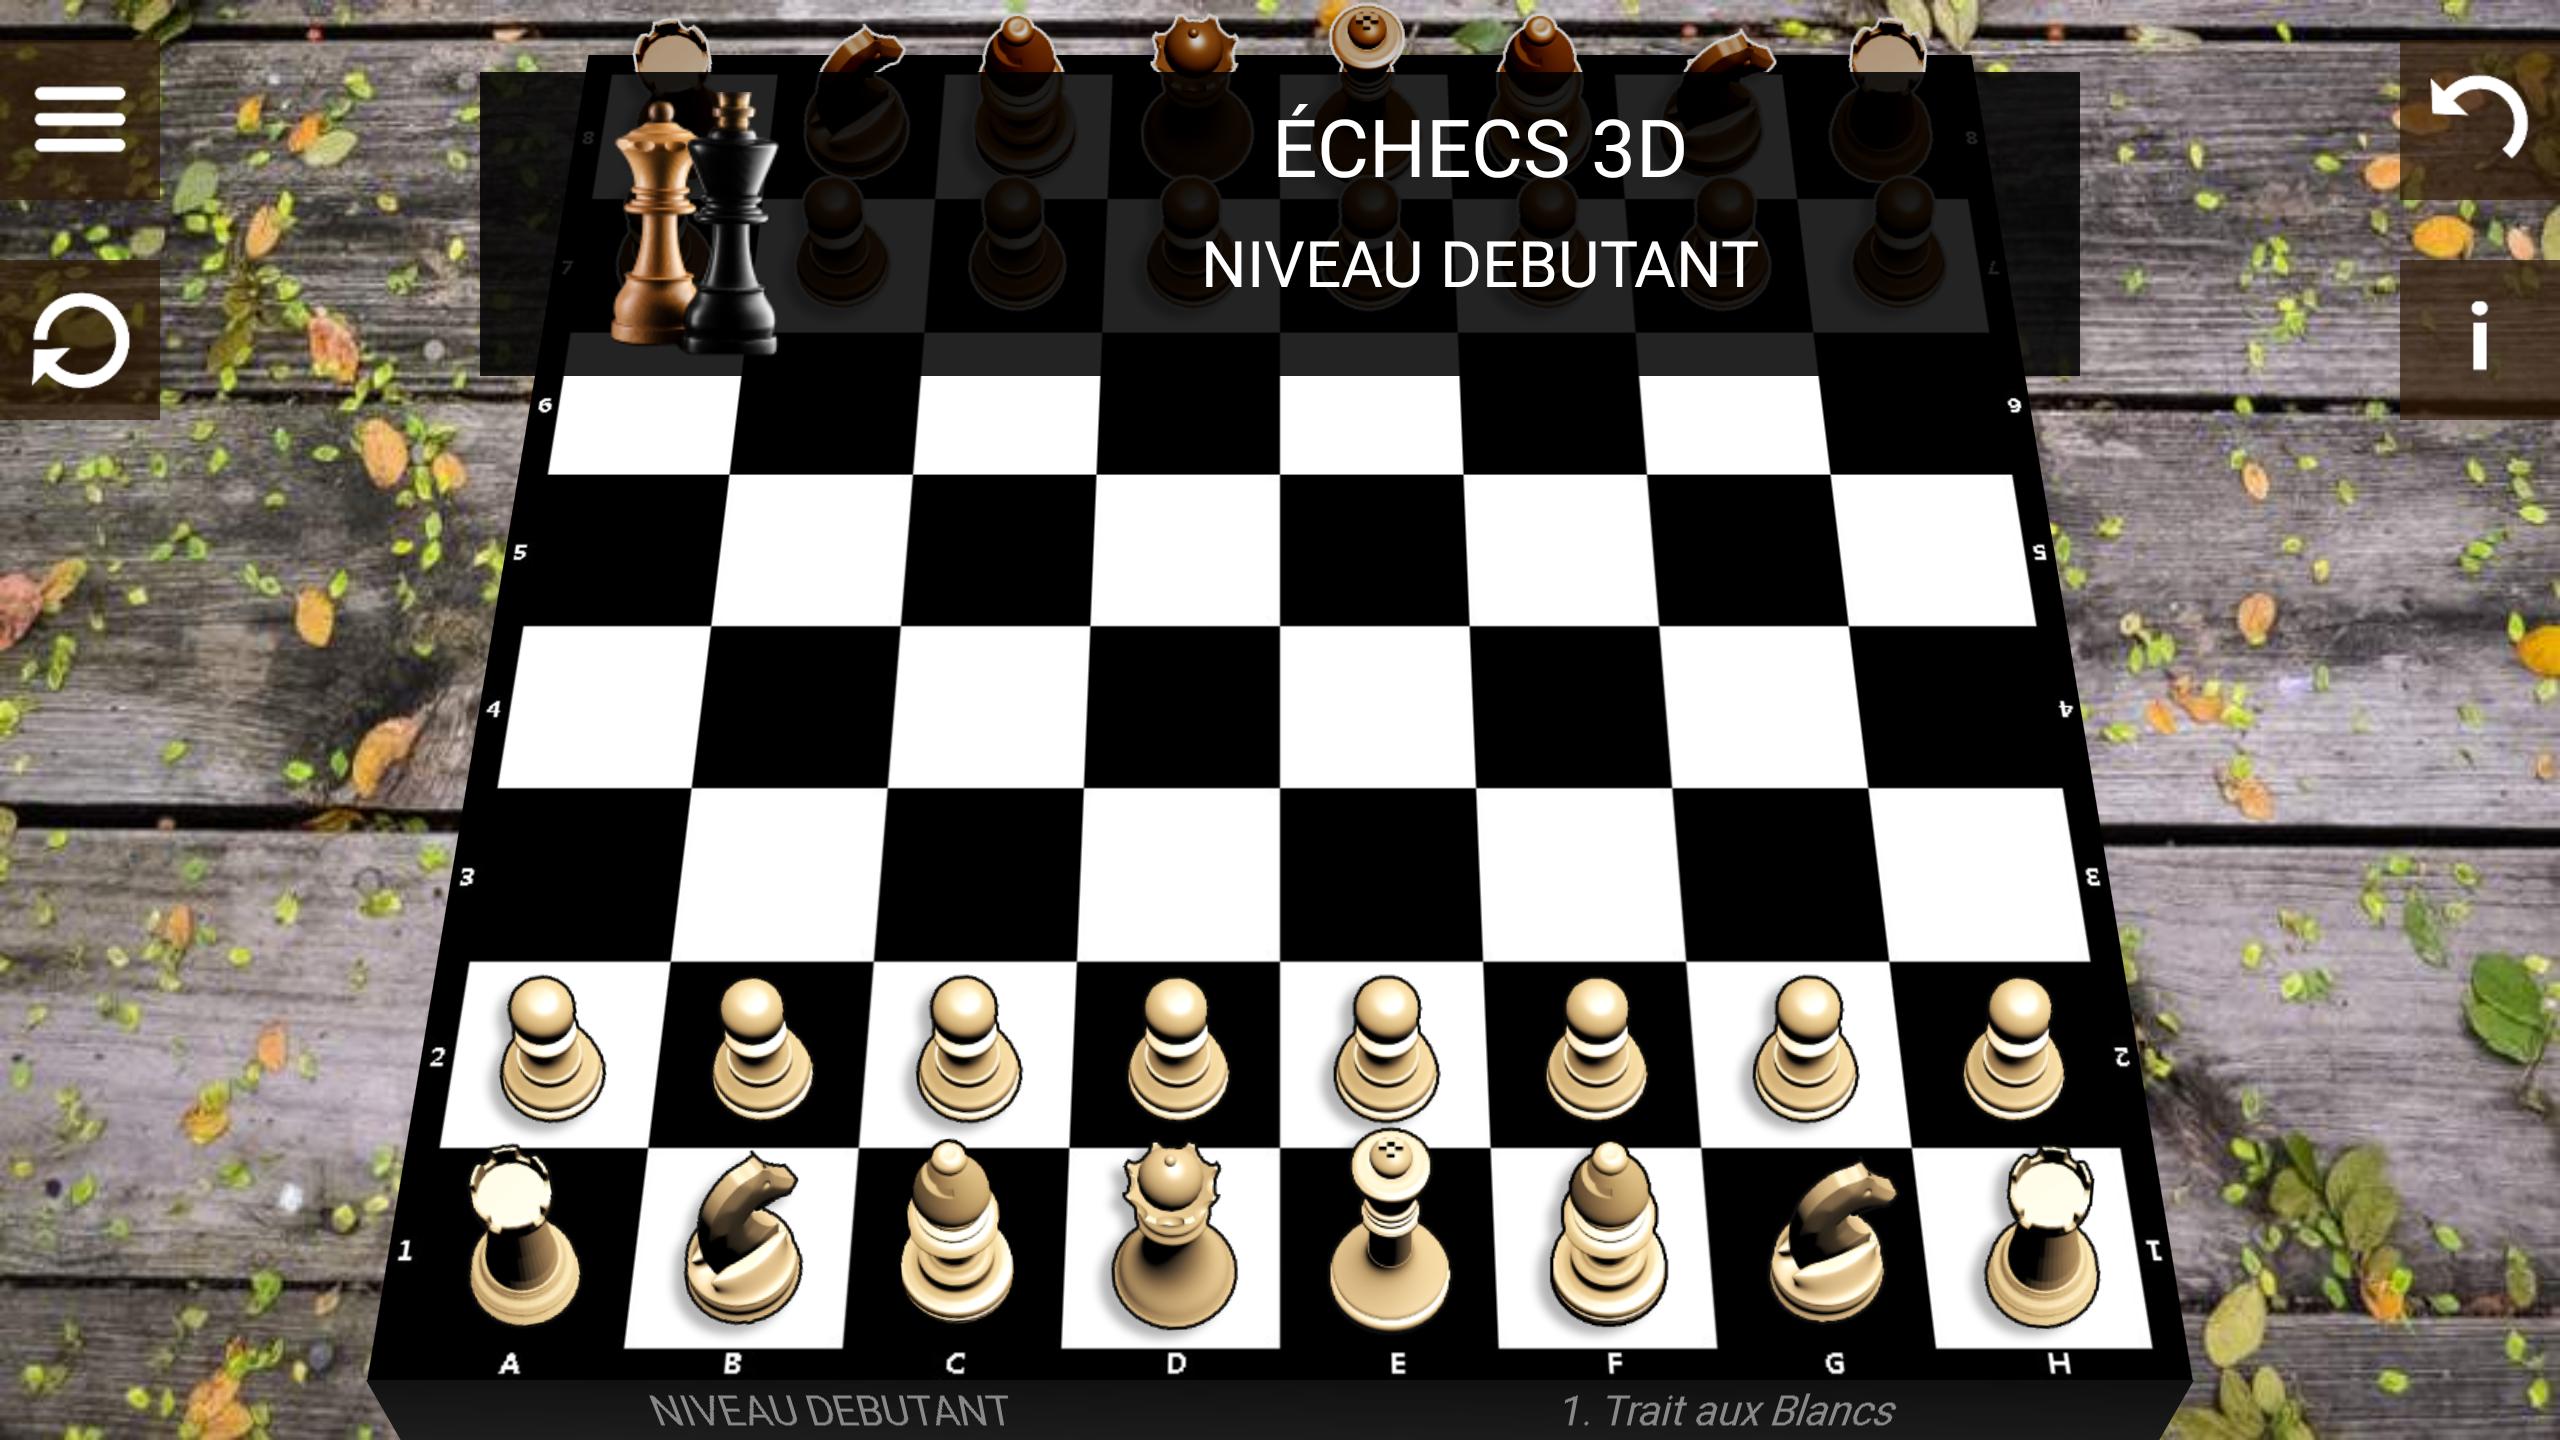 Echecs 3d (chess-Pro ) for Android - APK Download